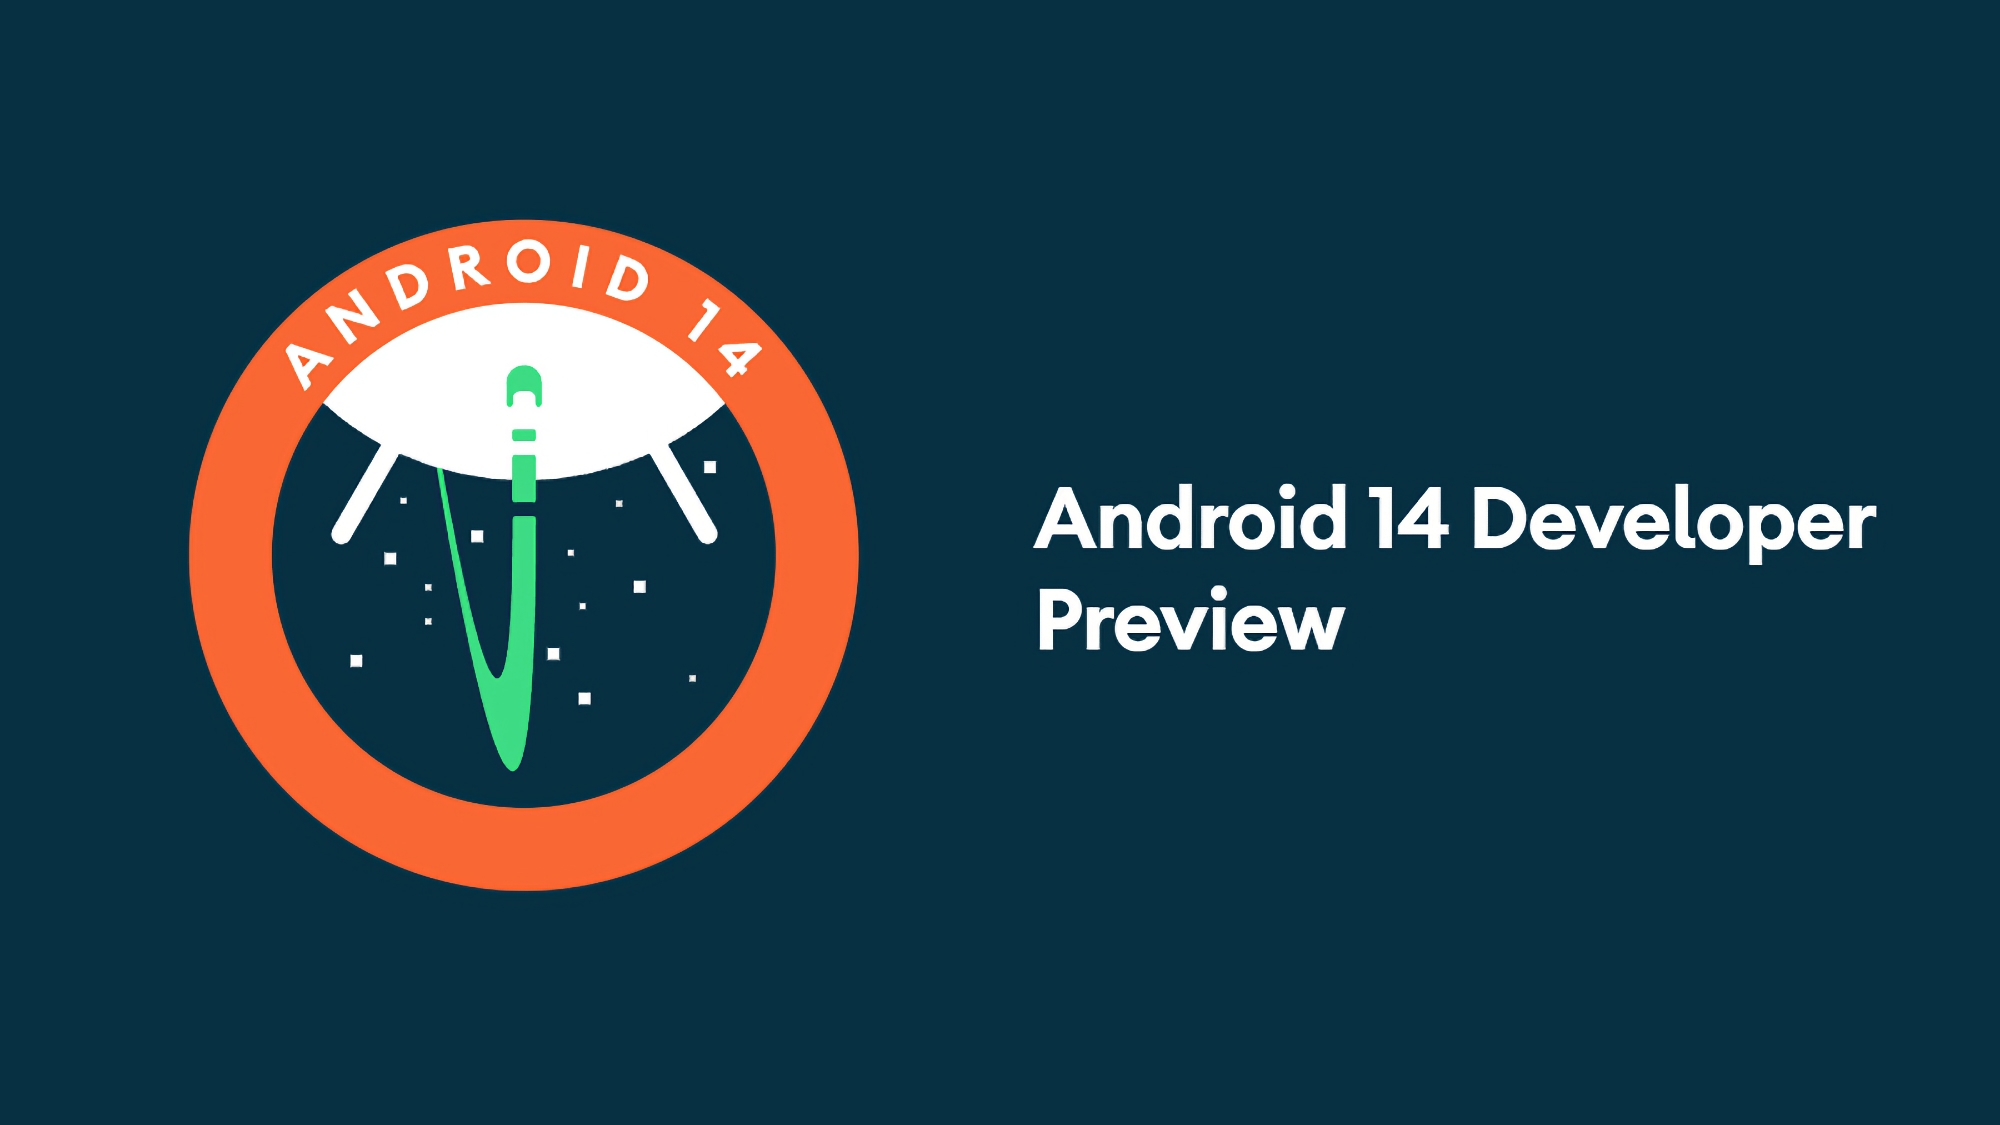 Unexpectedly! Google releases Android 14 Developer Preview for Pixel smartphones